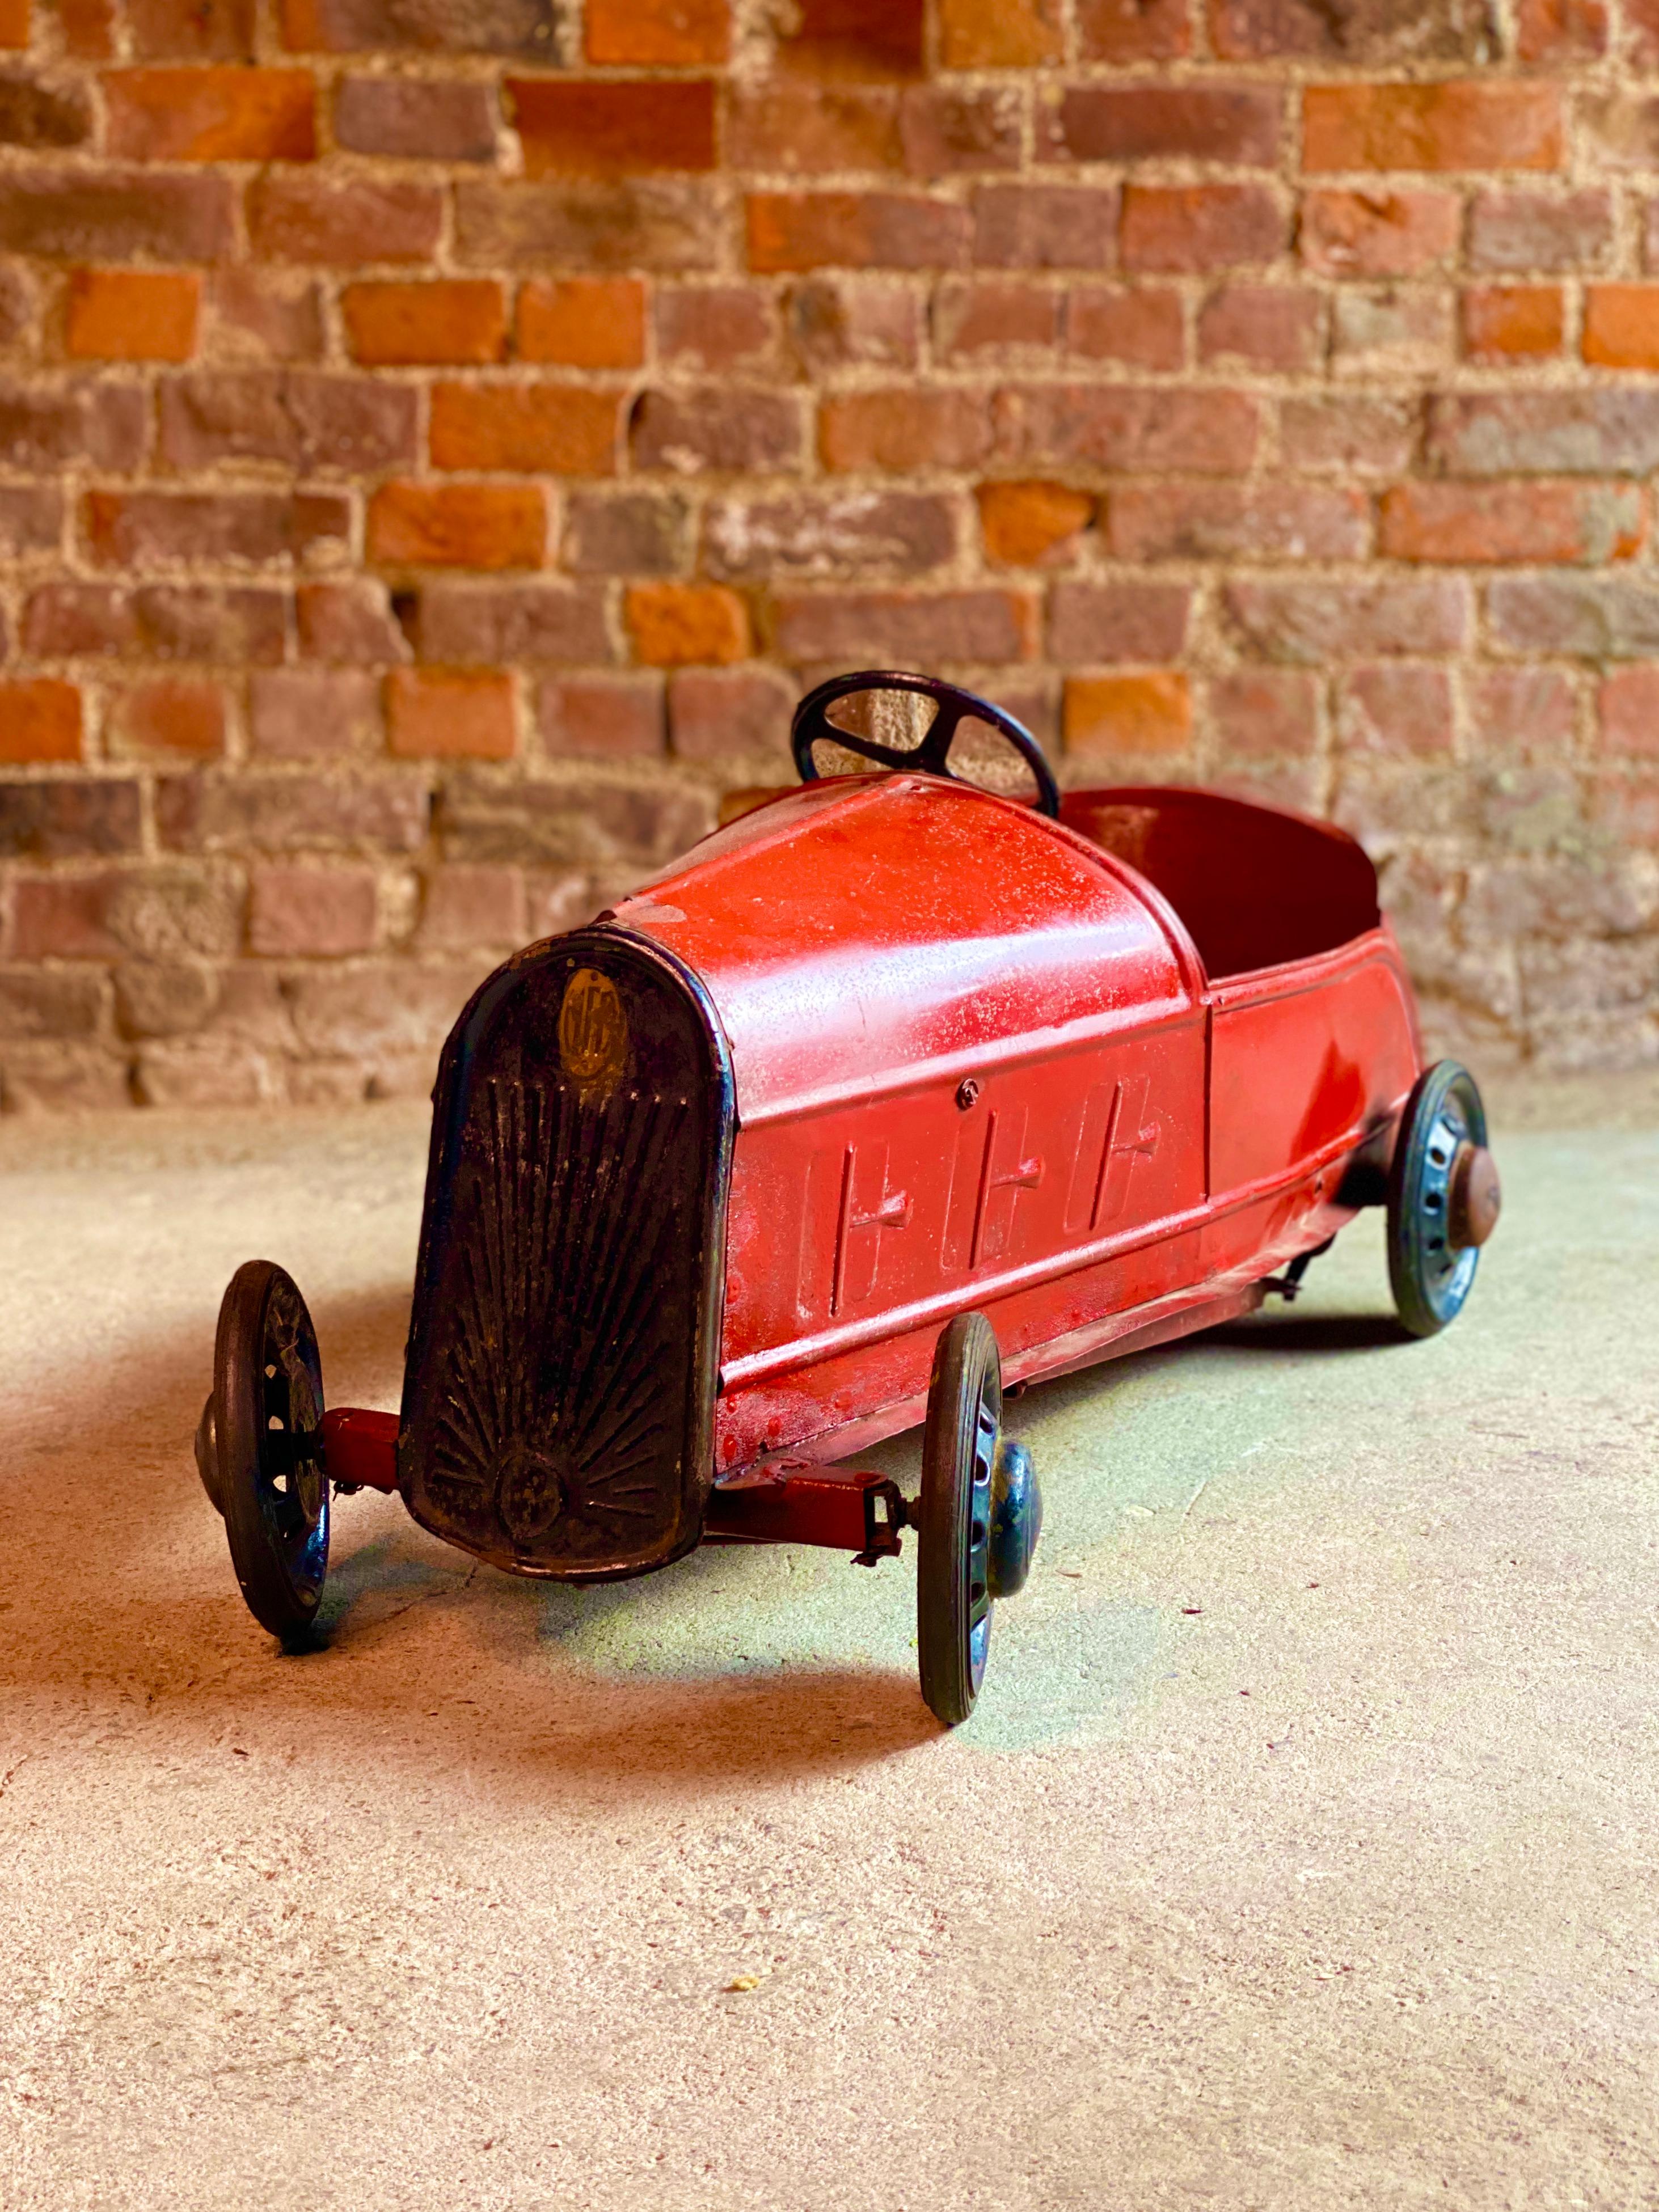 French vintage child’s pedal car metal Art Deco era, circa 1930s

Magnificent vintage French child’s metal pedal car, circa 1930s, typically French in styling, this super two-door sports coupe with maroon body, with four wheels with solid rubber